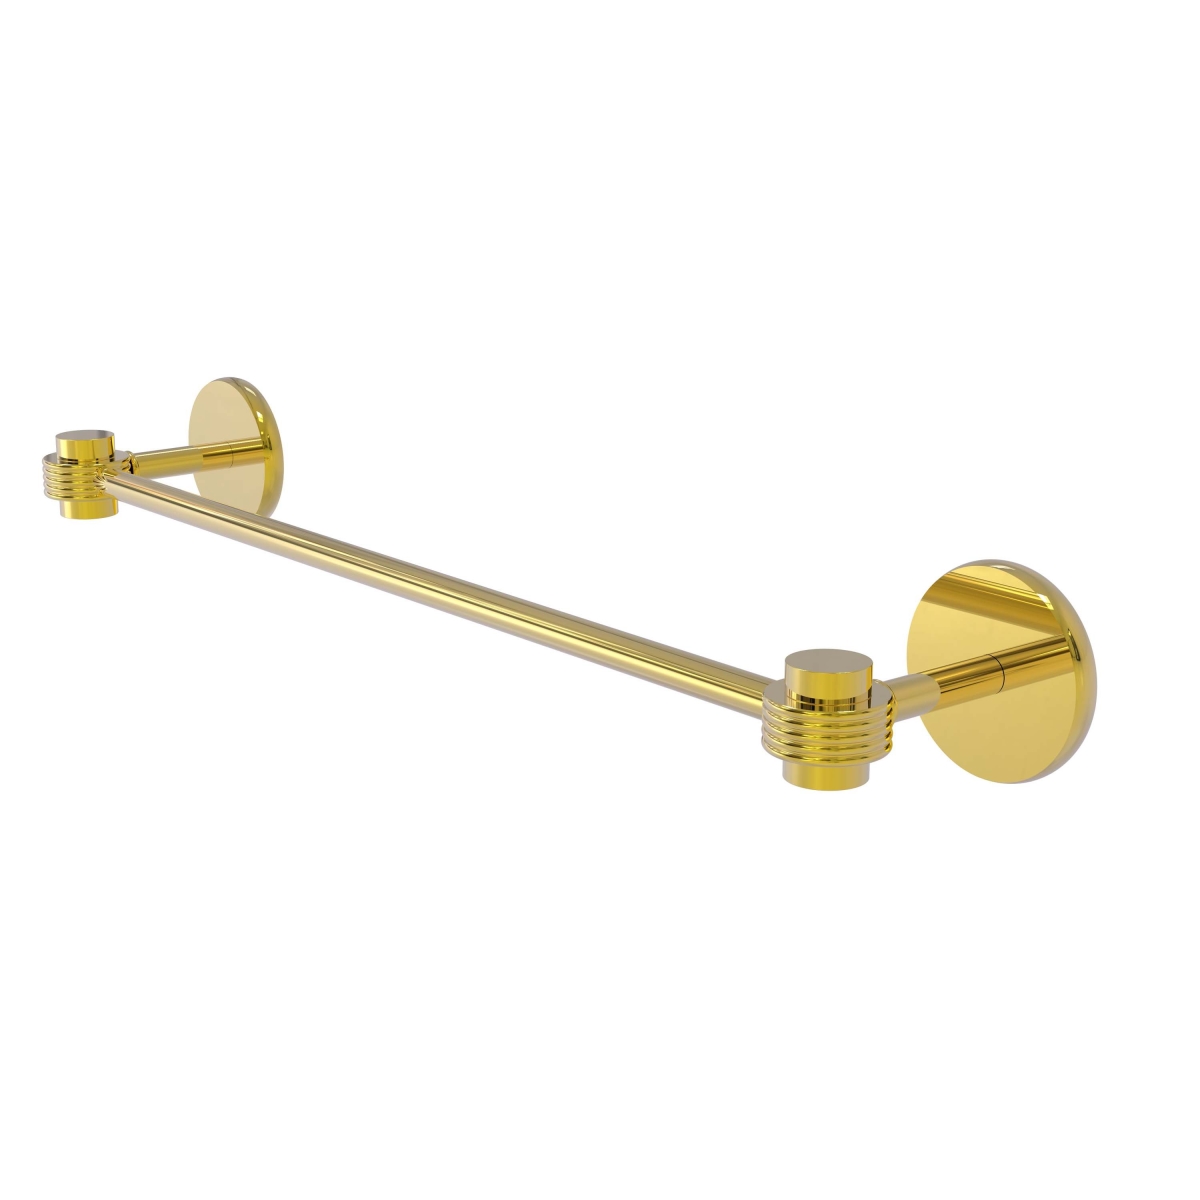 Allied Brass 7131G-36-PB 36 in. Satellite Orbit One Collection Towel Bar with Groovy Accents, Polished Brass